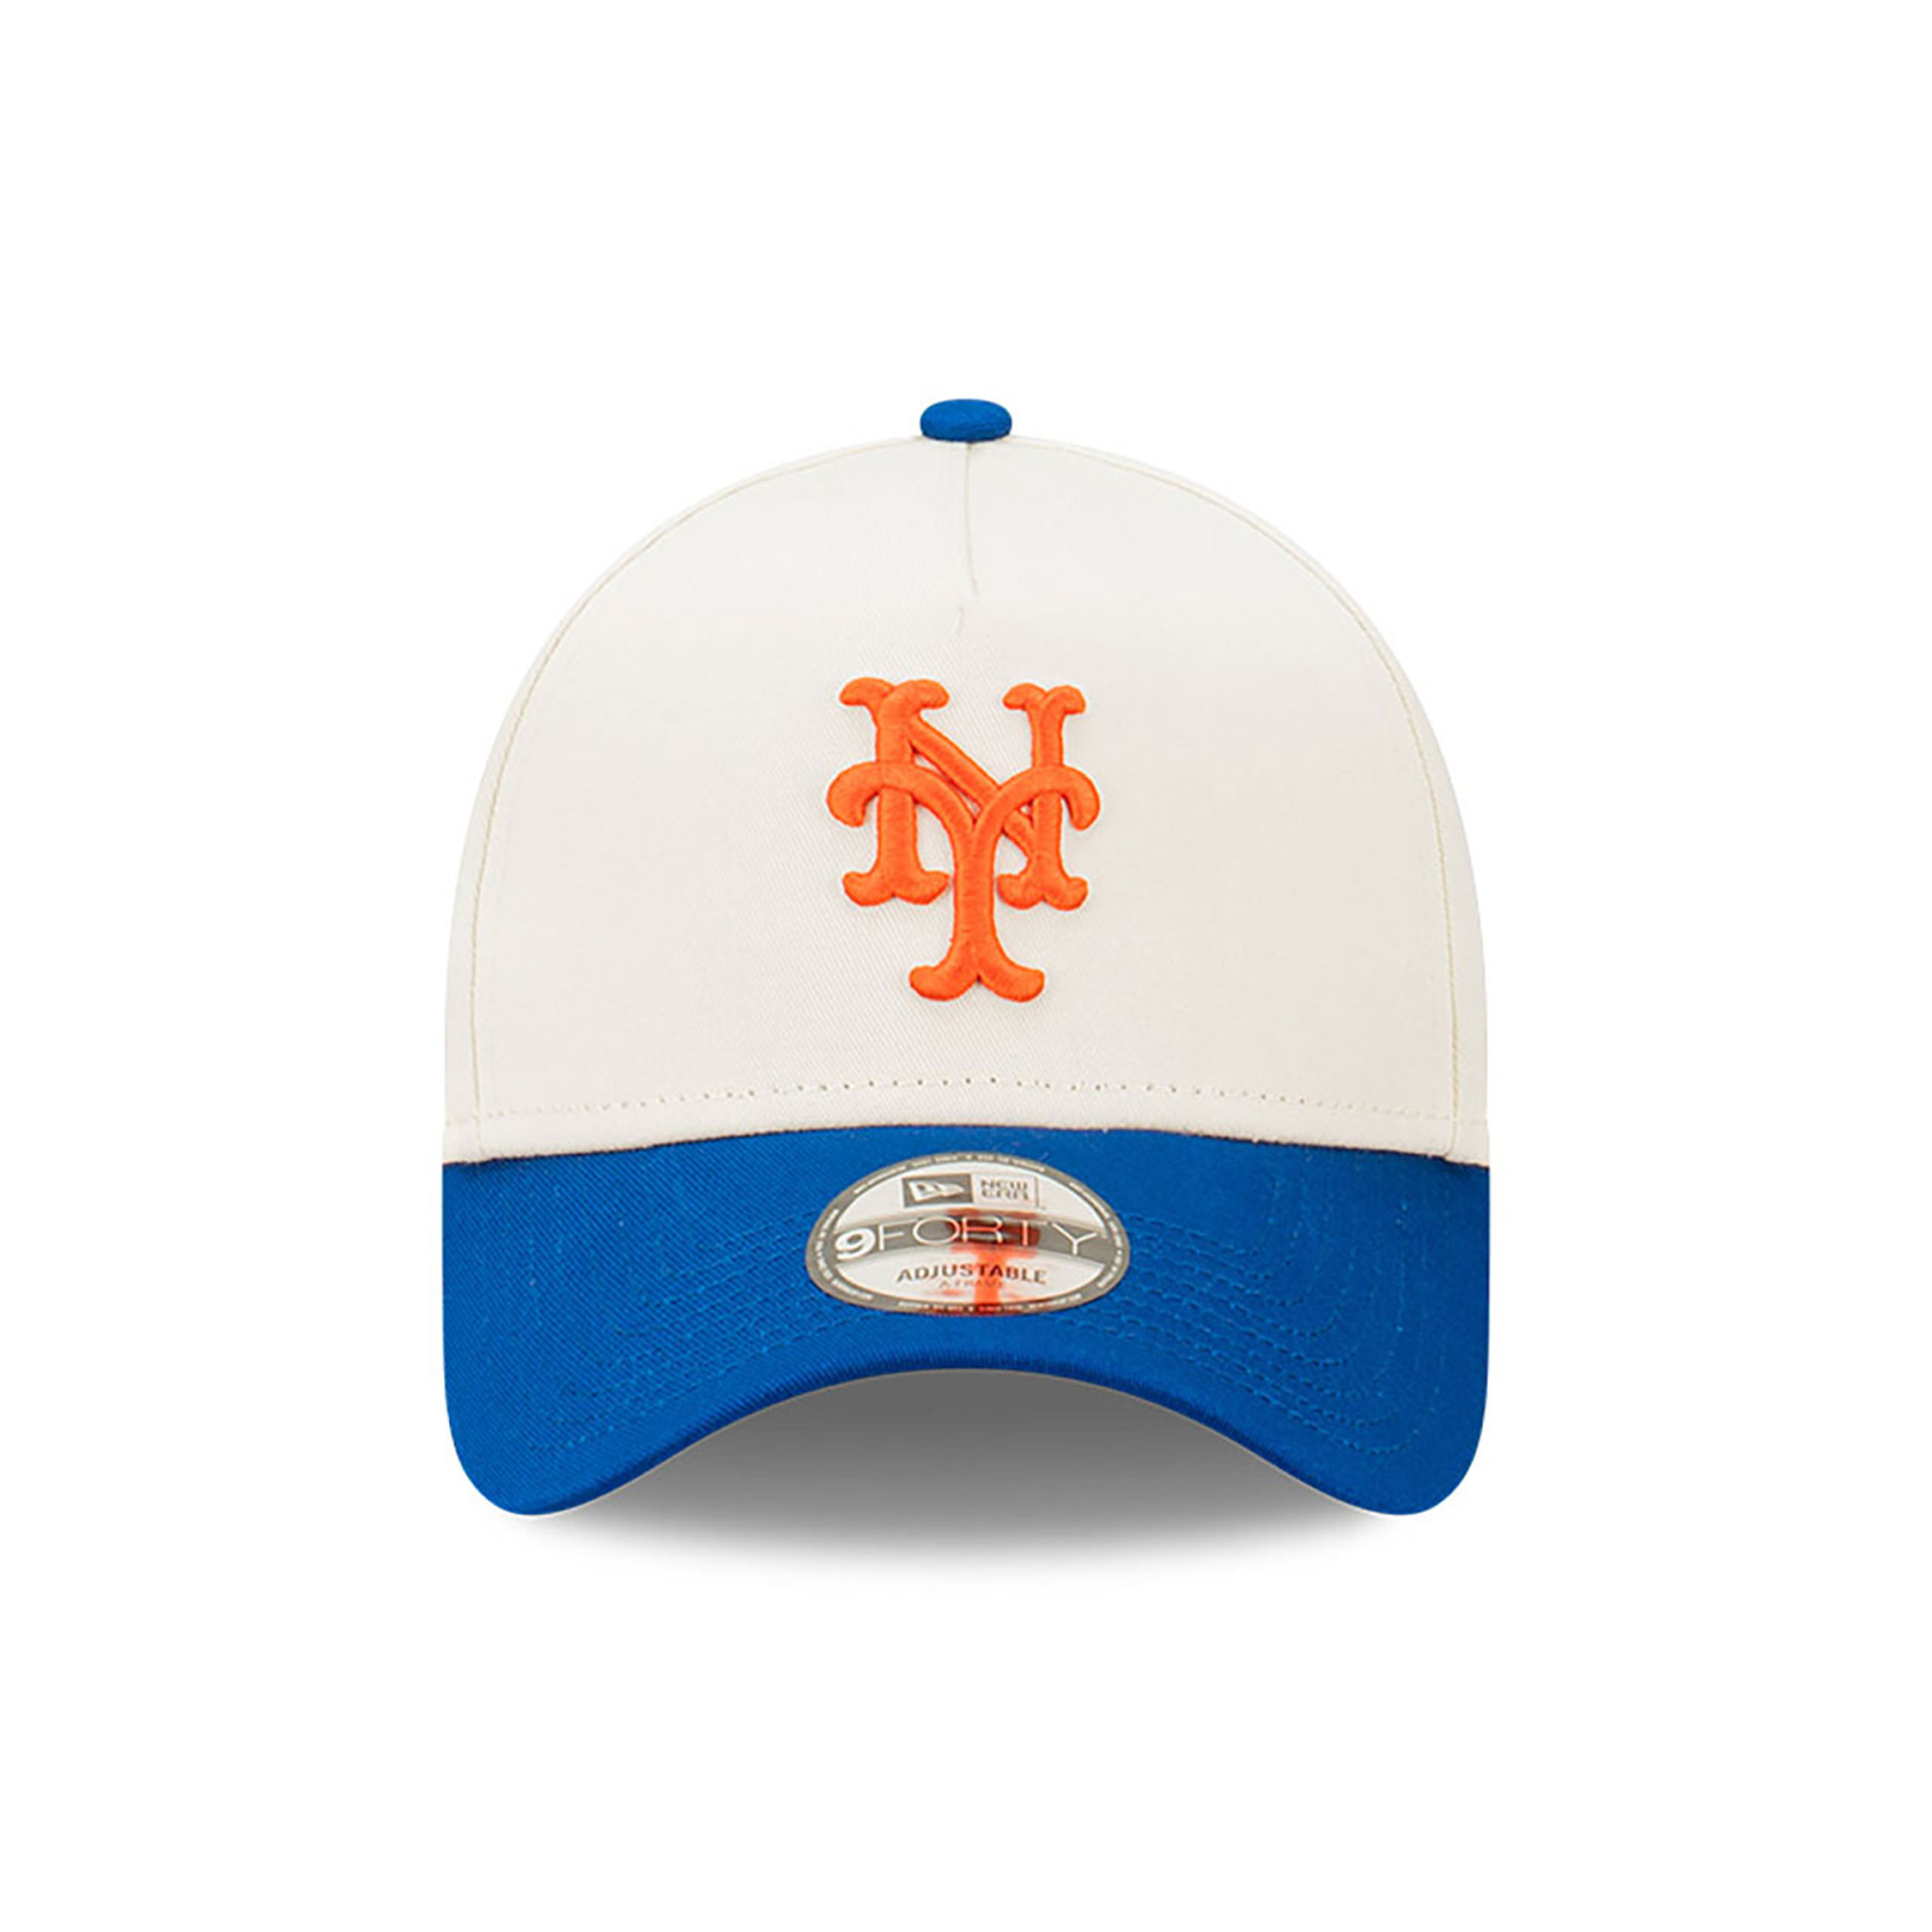 New York Mets All Star Game Vintage White 9FORTY A-Frame Adjustable Cap